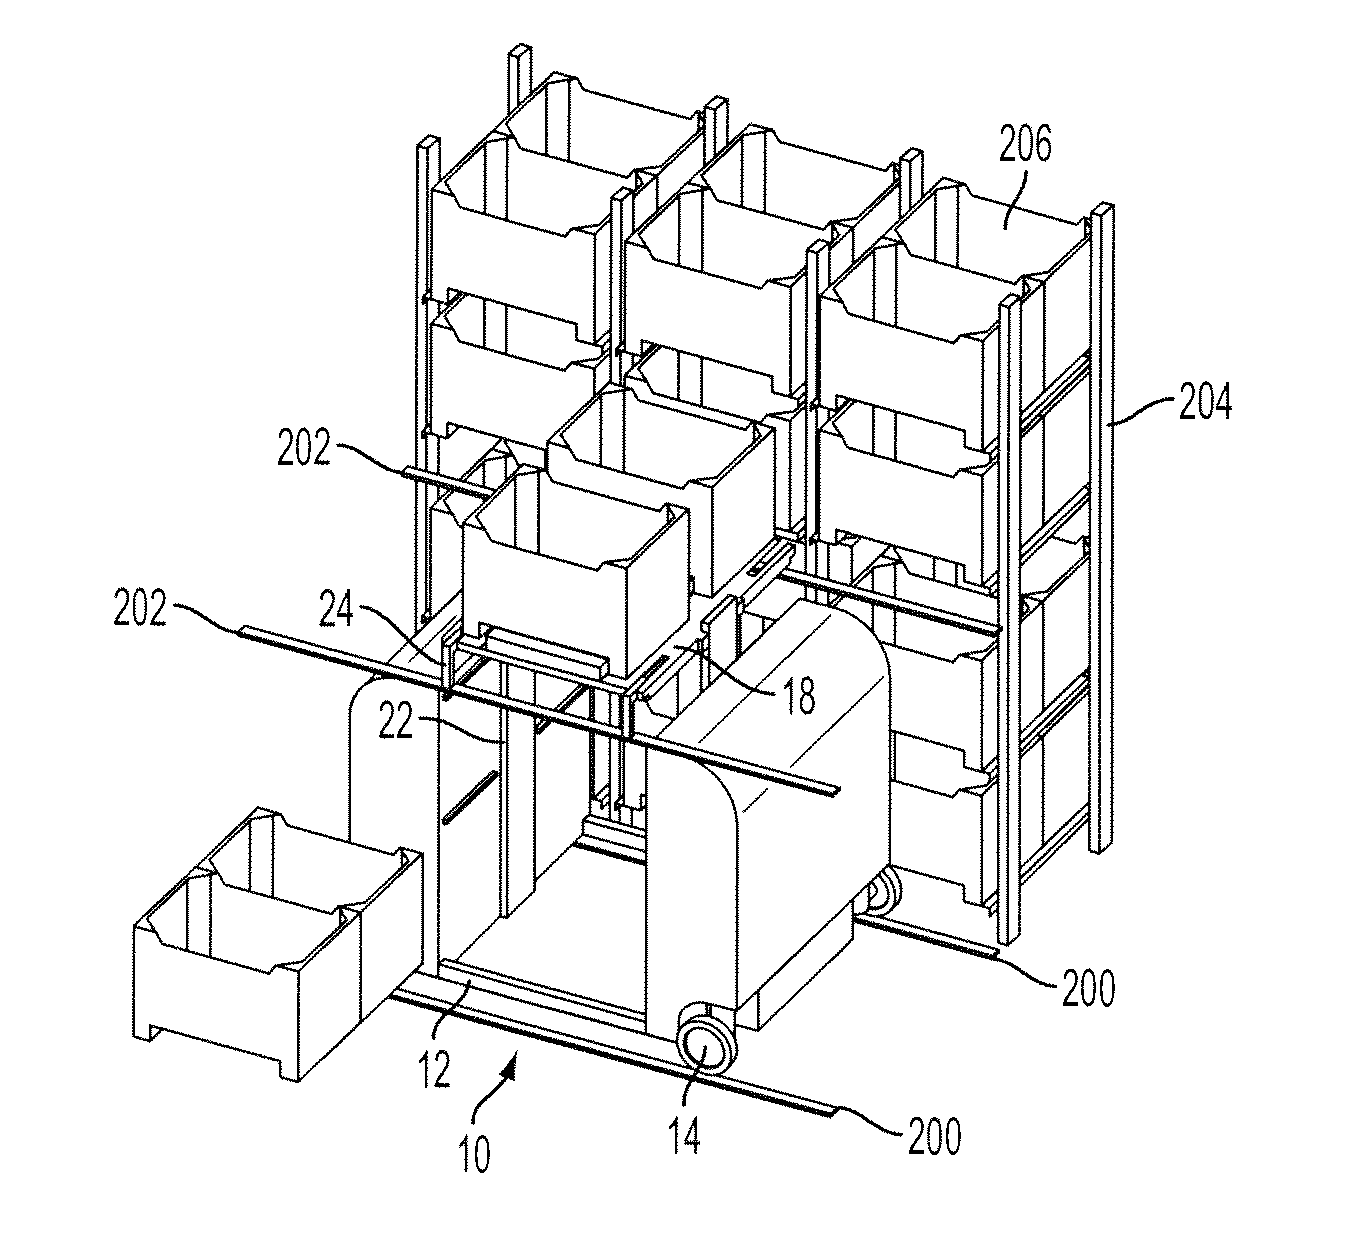 Self-lifting robotic device with load handling mechanism